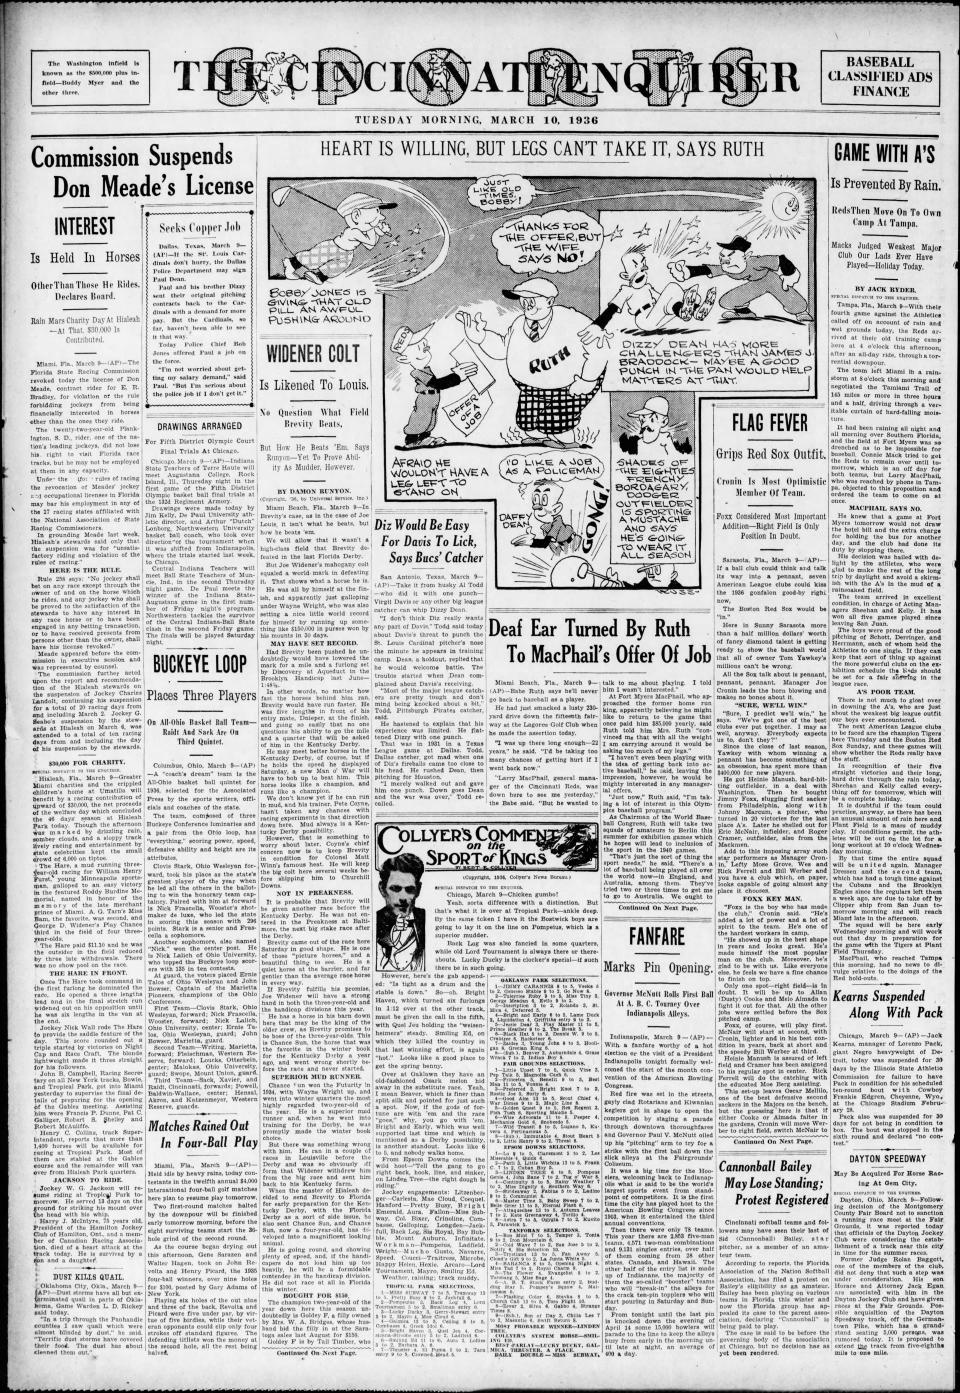 March 10, 1936 Cincinnati Enquirer sports cover with headline: Heart is willing, but legs can't take it, says Ruth